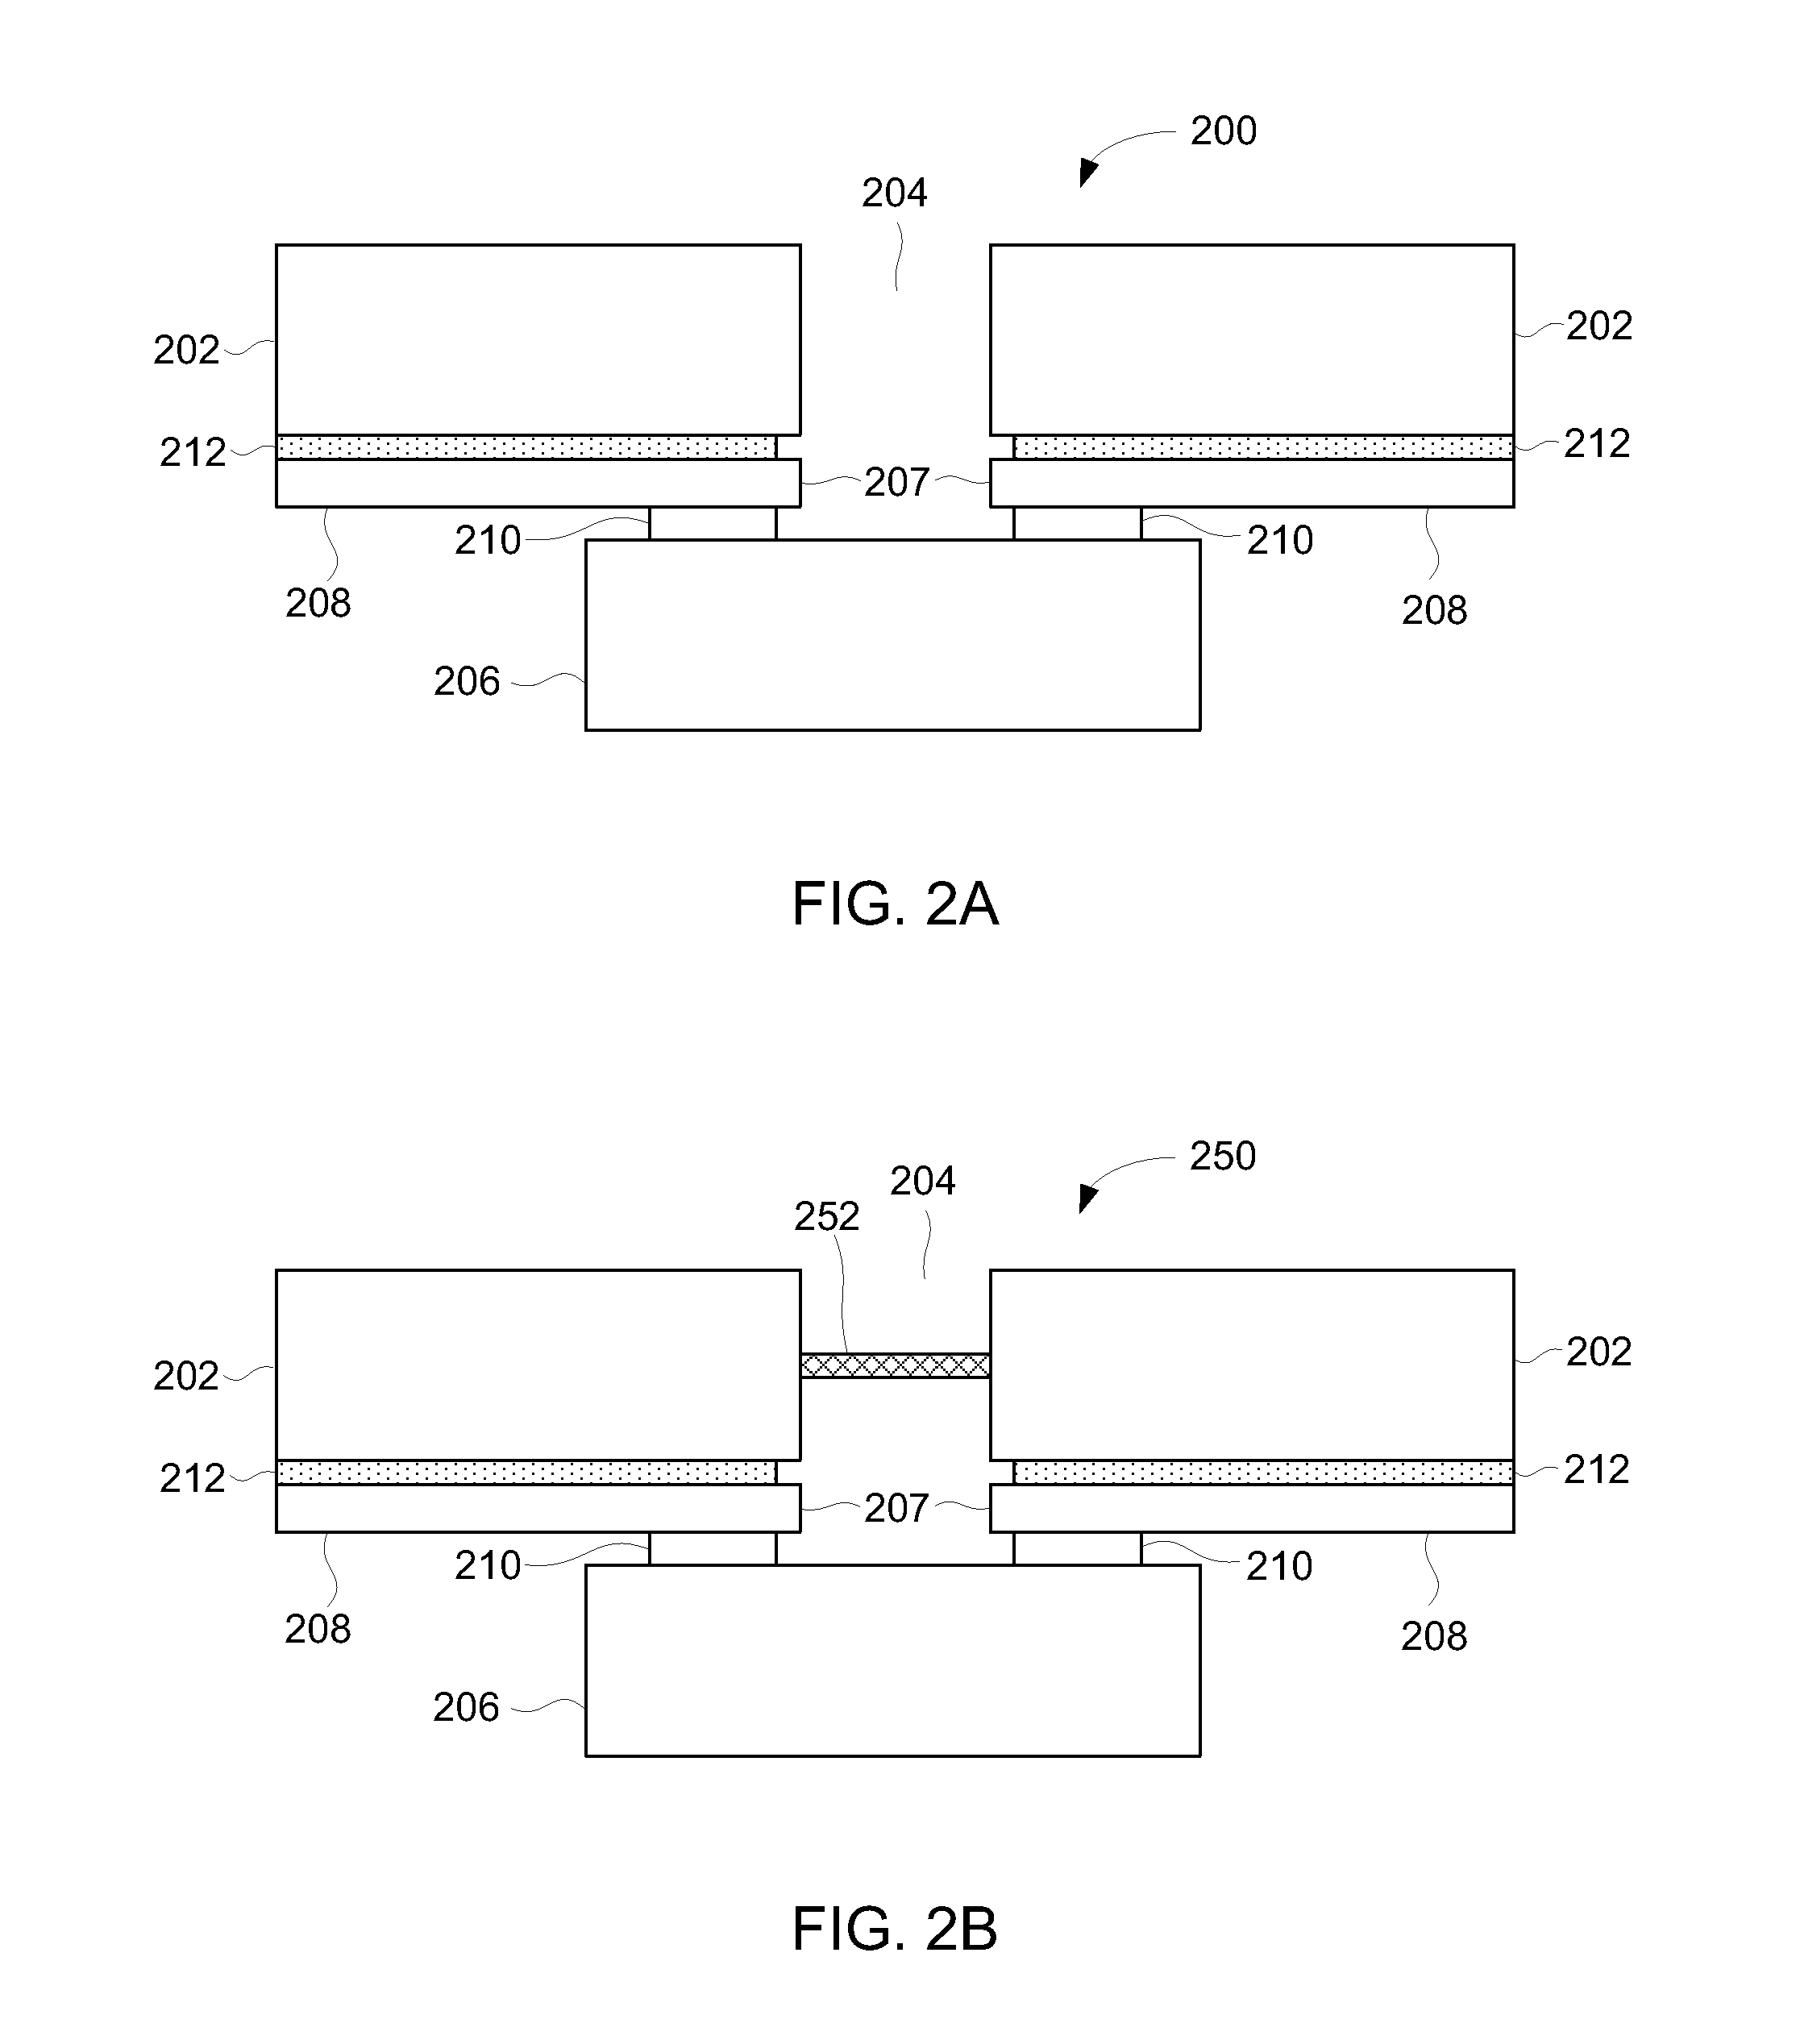 Audio Port Configuration for Compact Electronic Devices